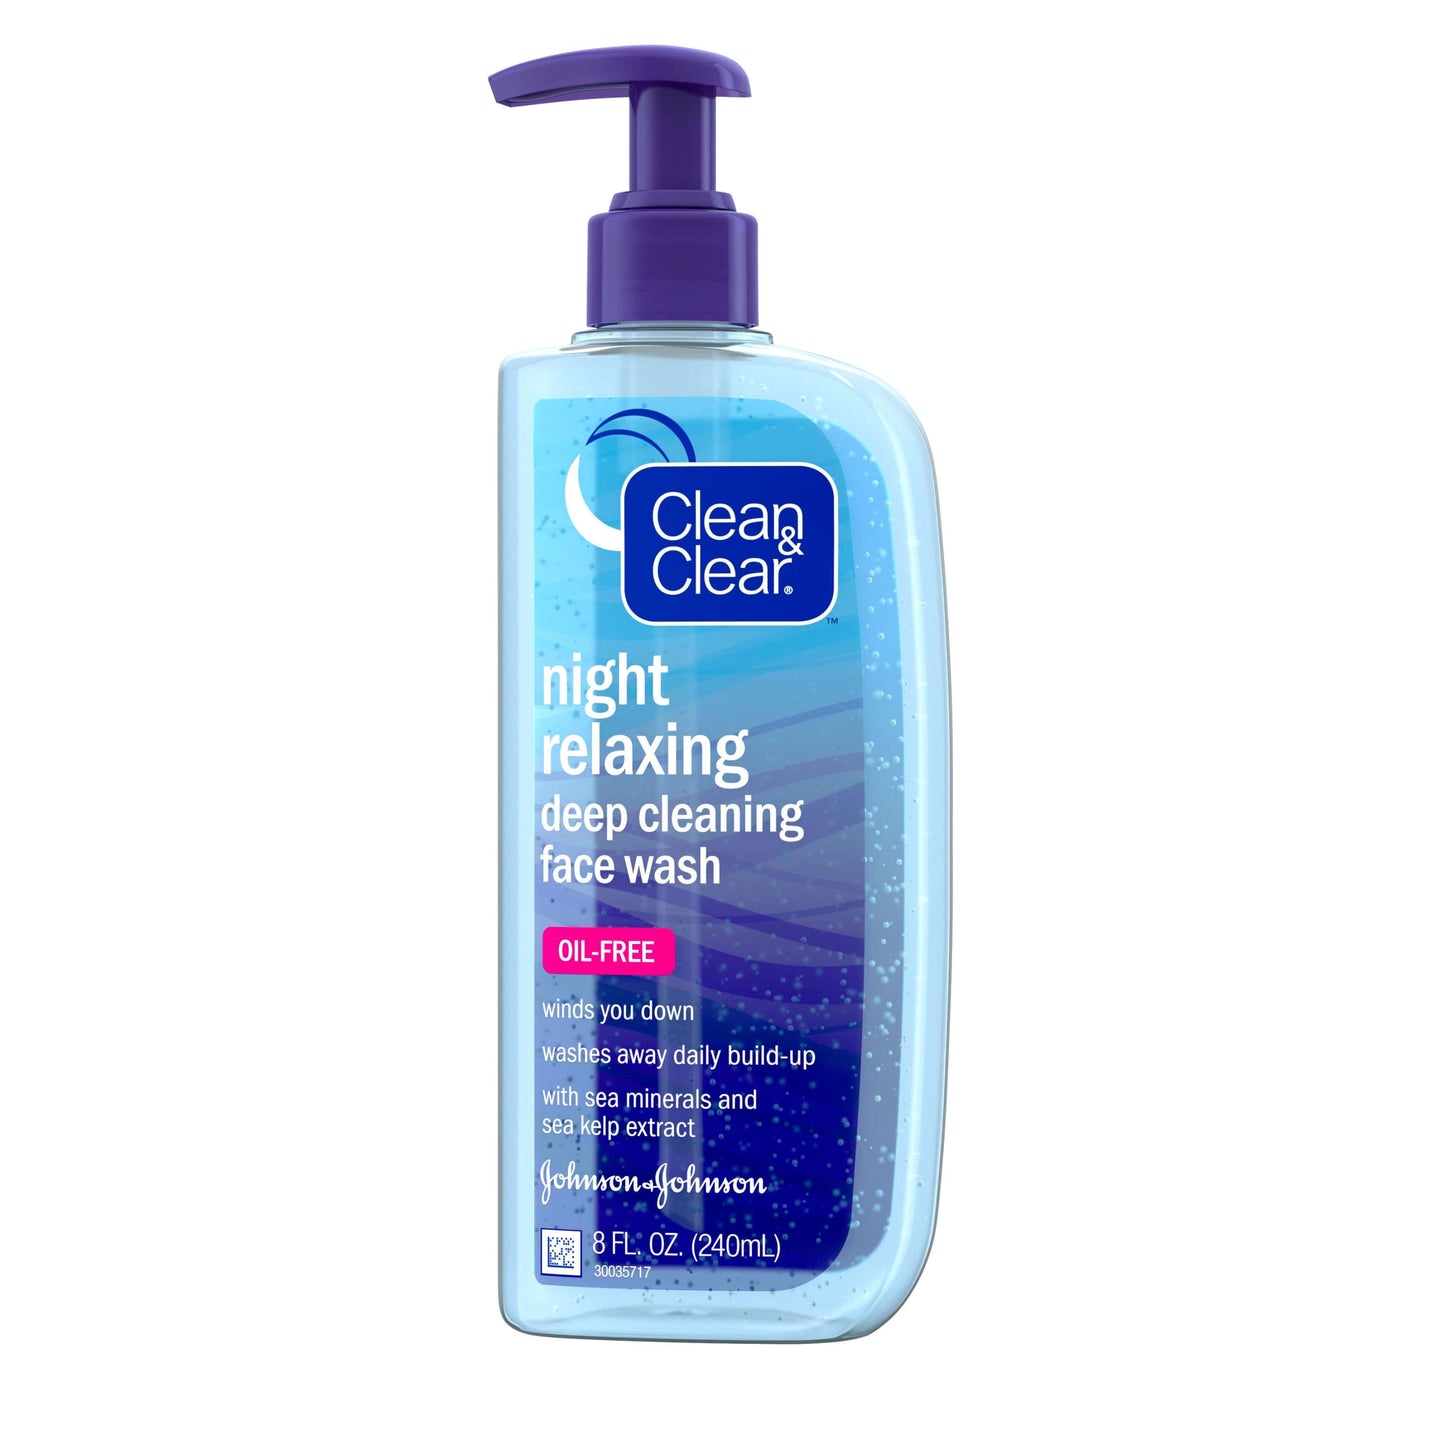 CLEAN & CLEAR NIGHT RELAXING DEEP CLEANING FACE WASH